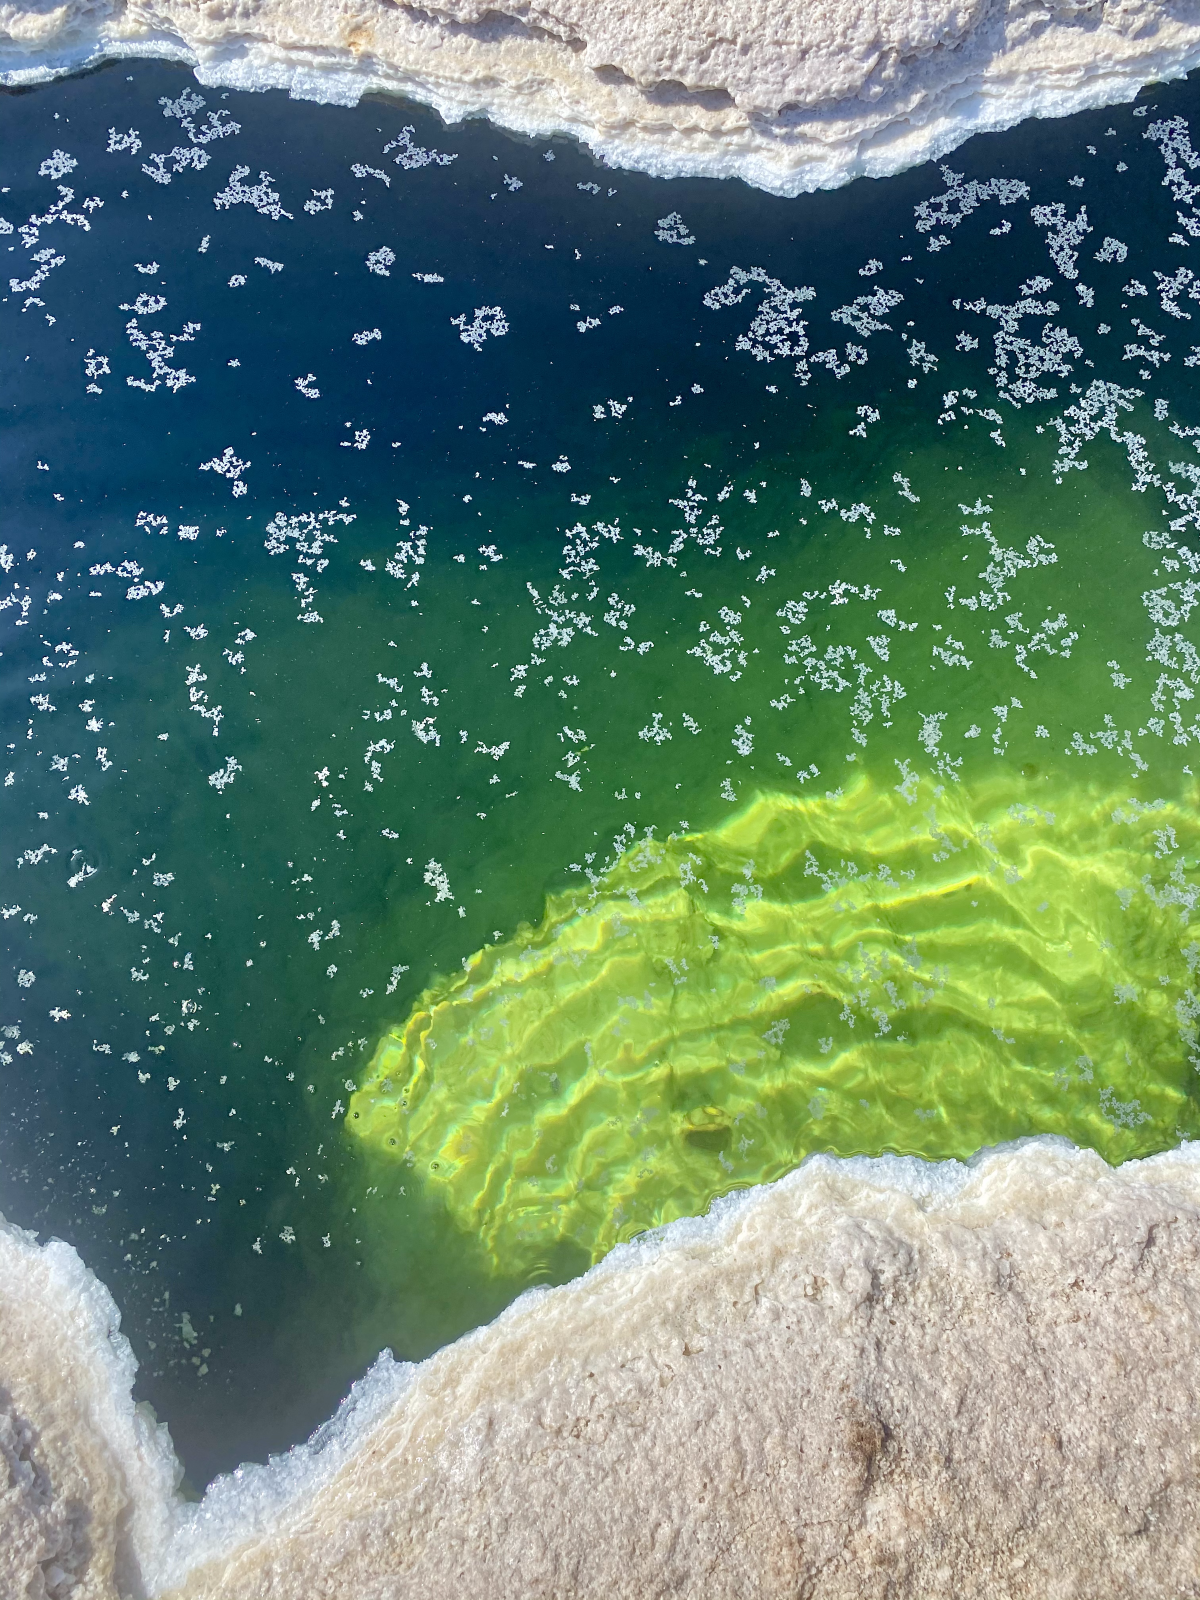 Another close-up of the toxic pools. The water gradients from light neon green, to dark green, to a deep blue. The liquid is surrounded by white crystal formations and smaller white particles which float atop the water